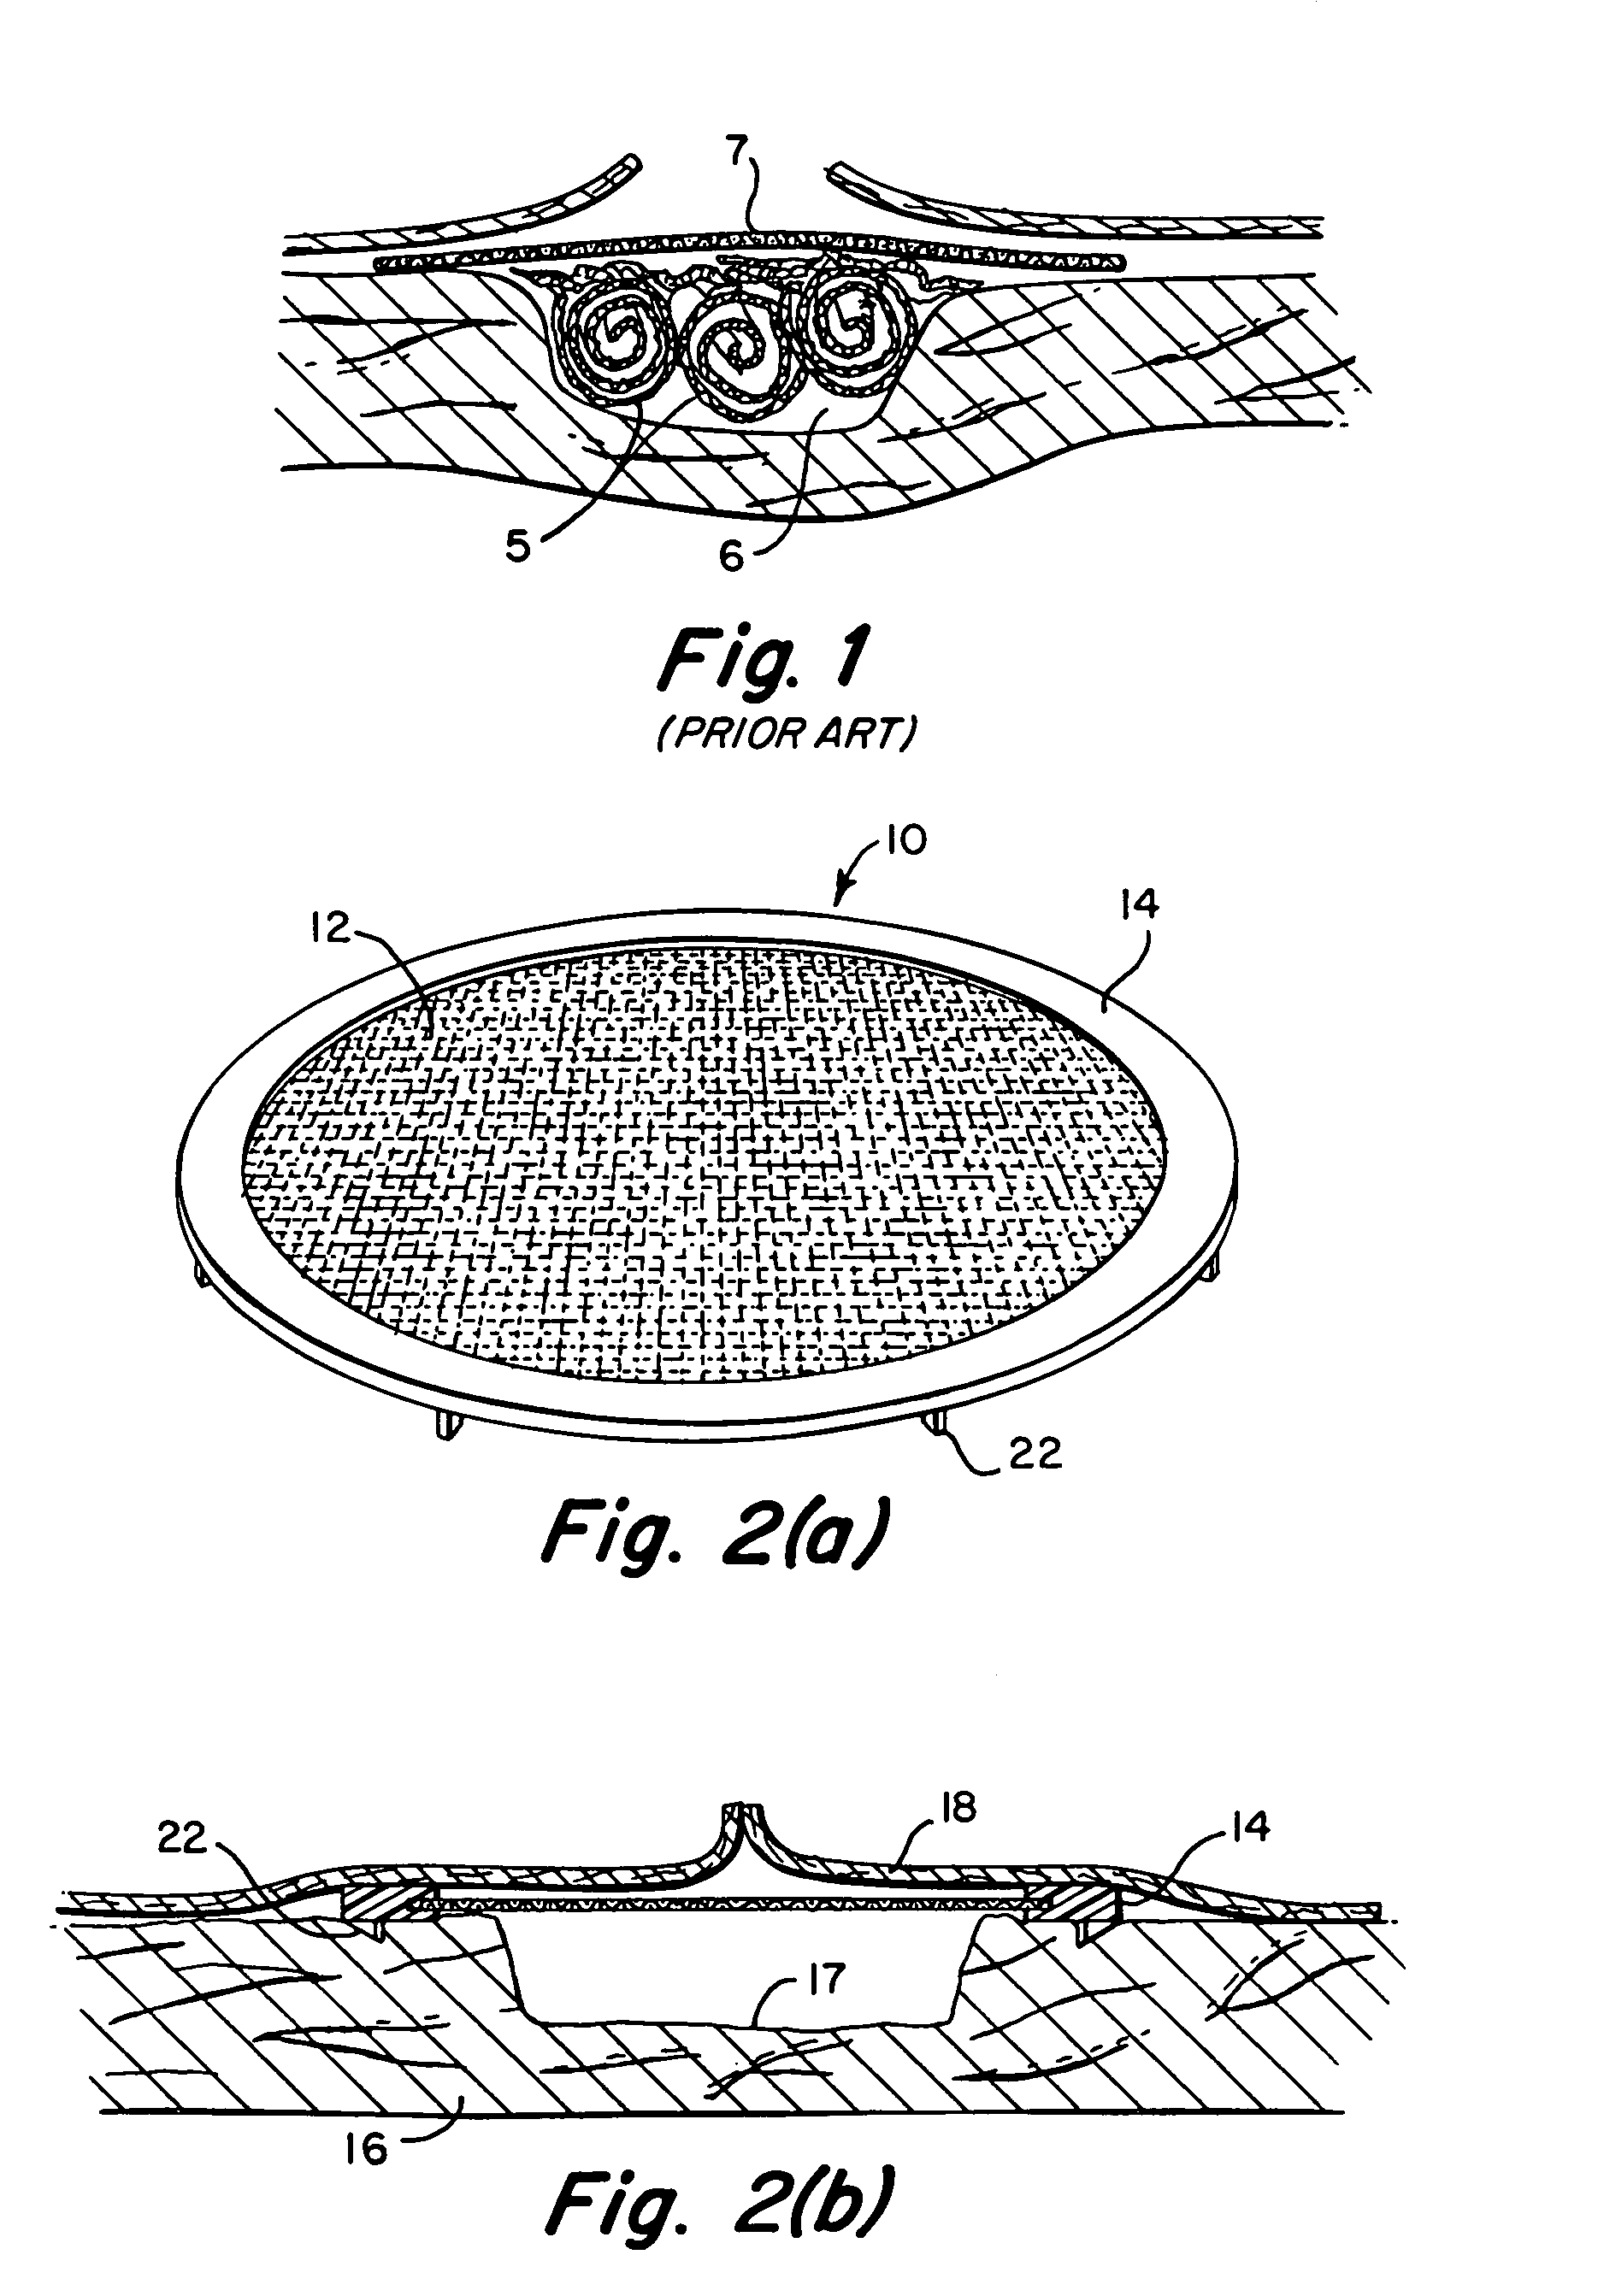 Implantable prosthesis and method and apparatus for loading and delivering an implantable prosthesis